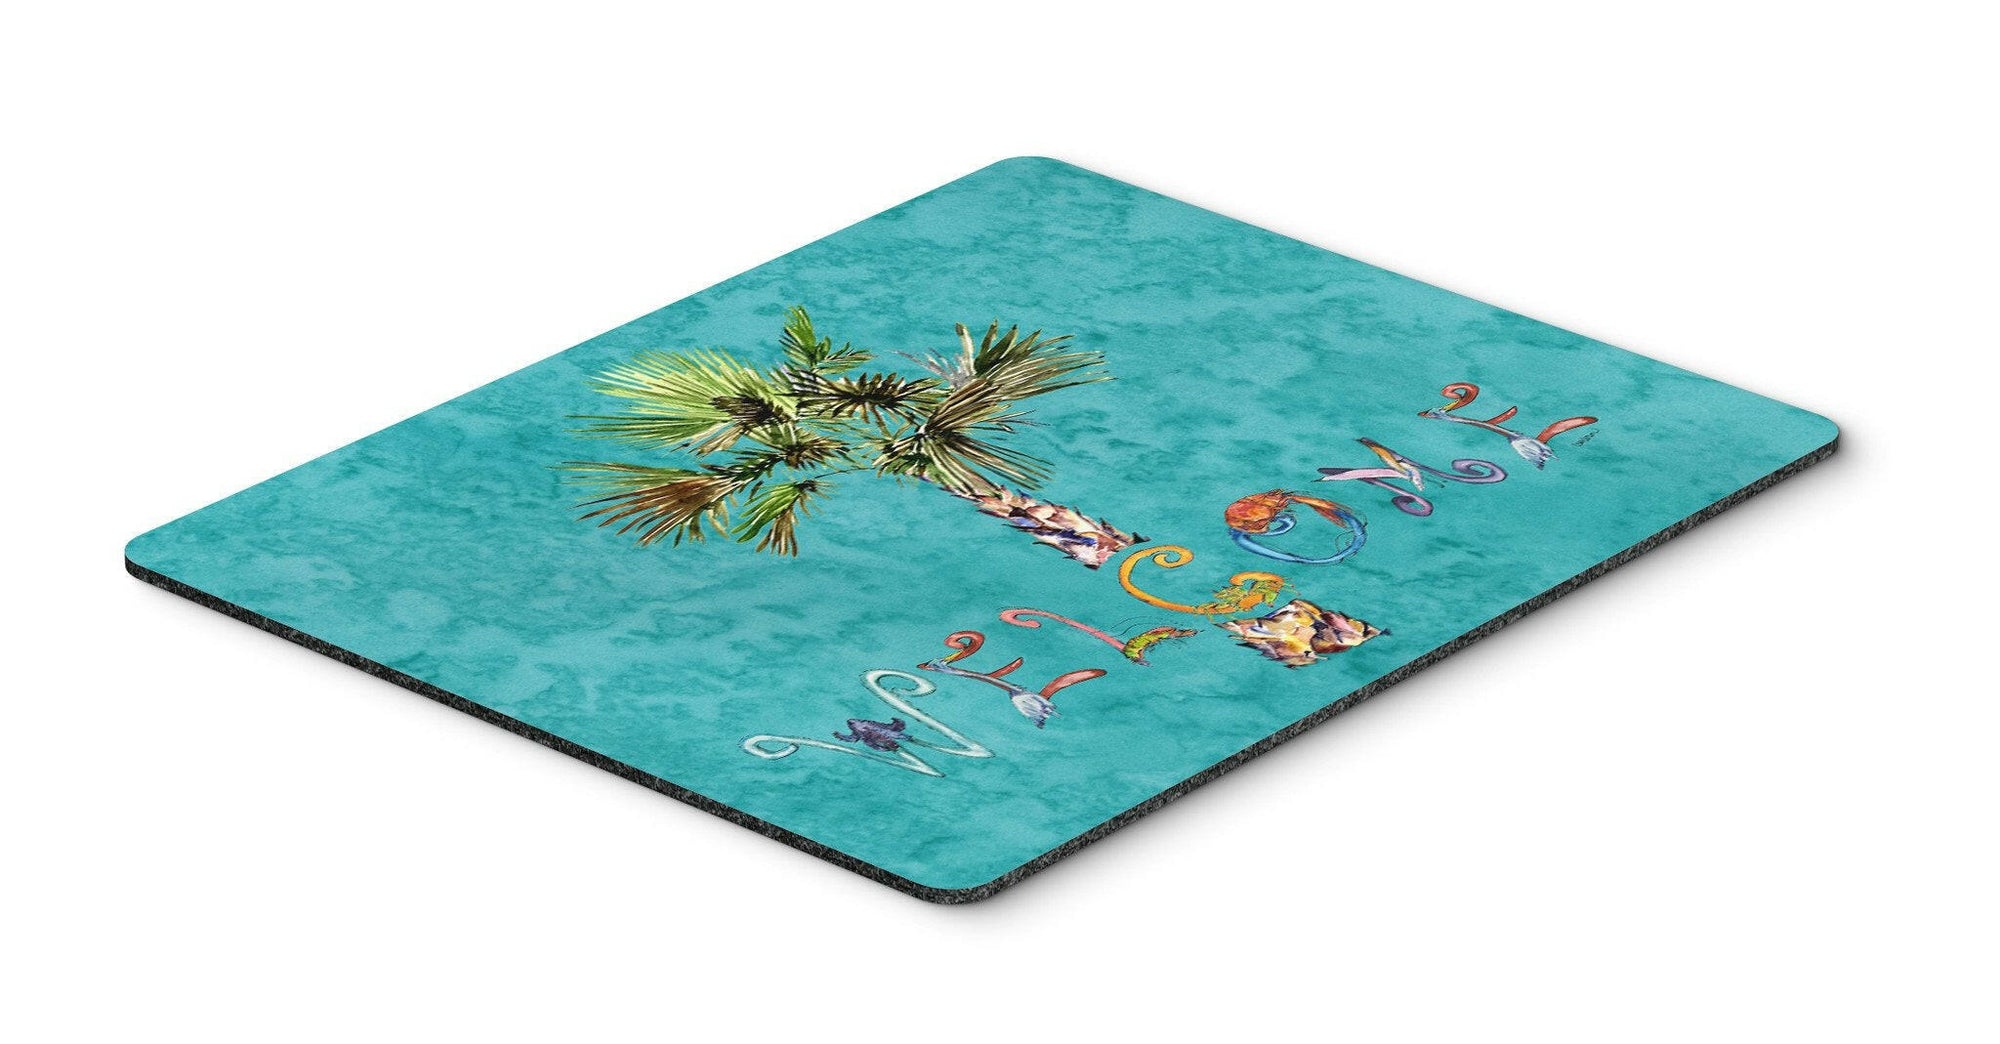 Welcome Palm Tree on Teal Mouse Pad, Hot Pad or Trivet 8711MP by Caroline's Treasures